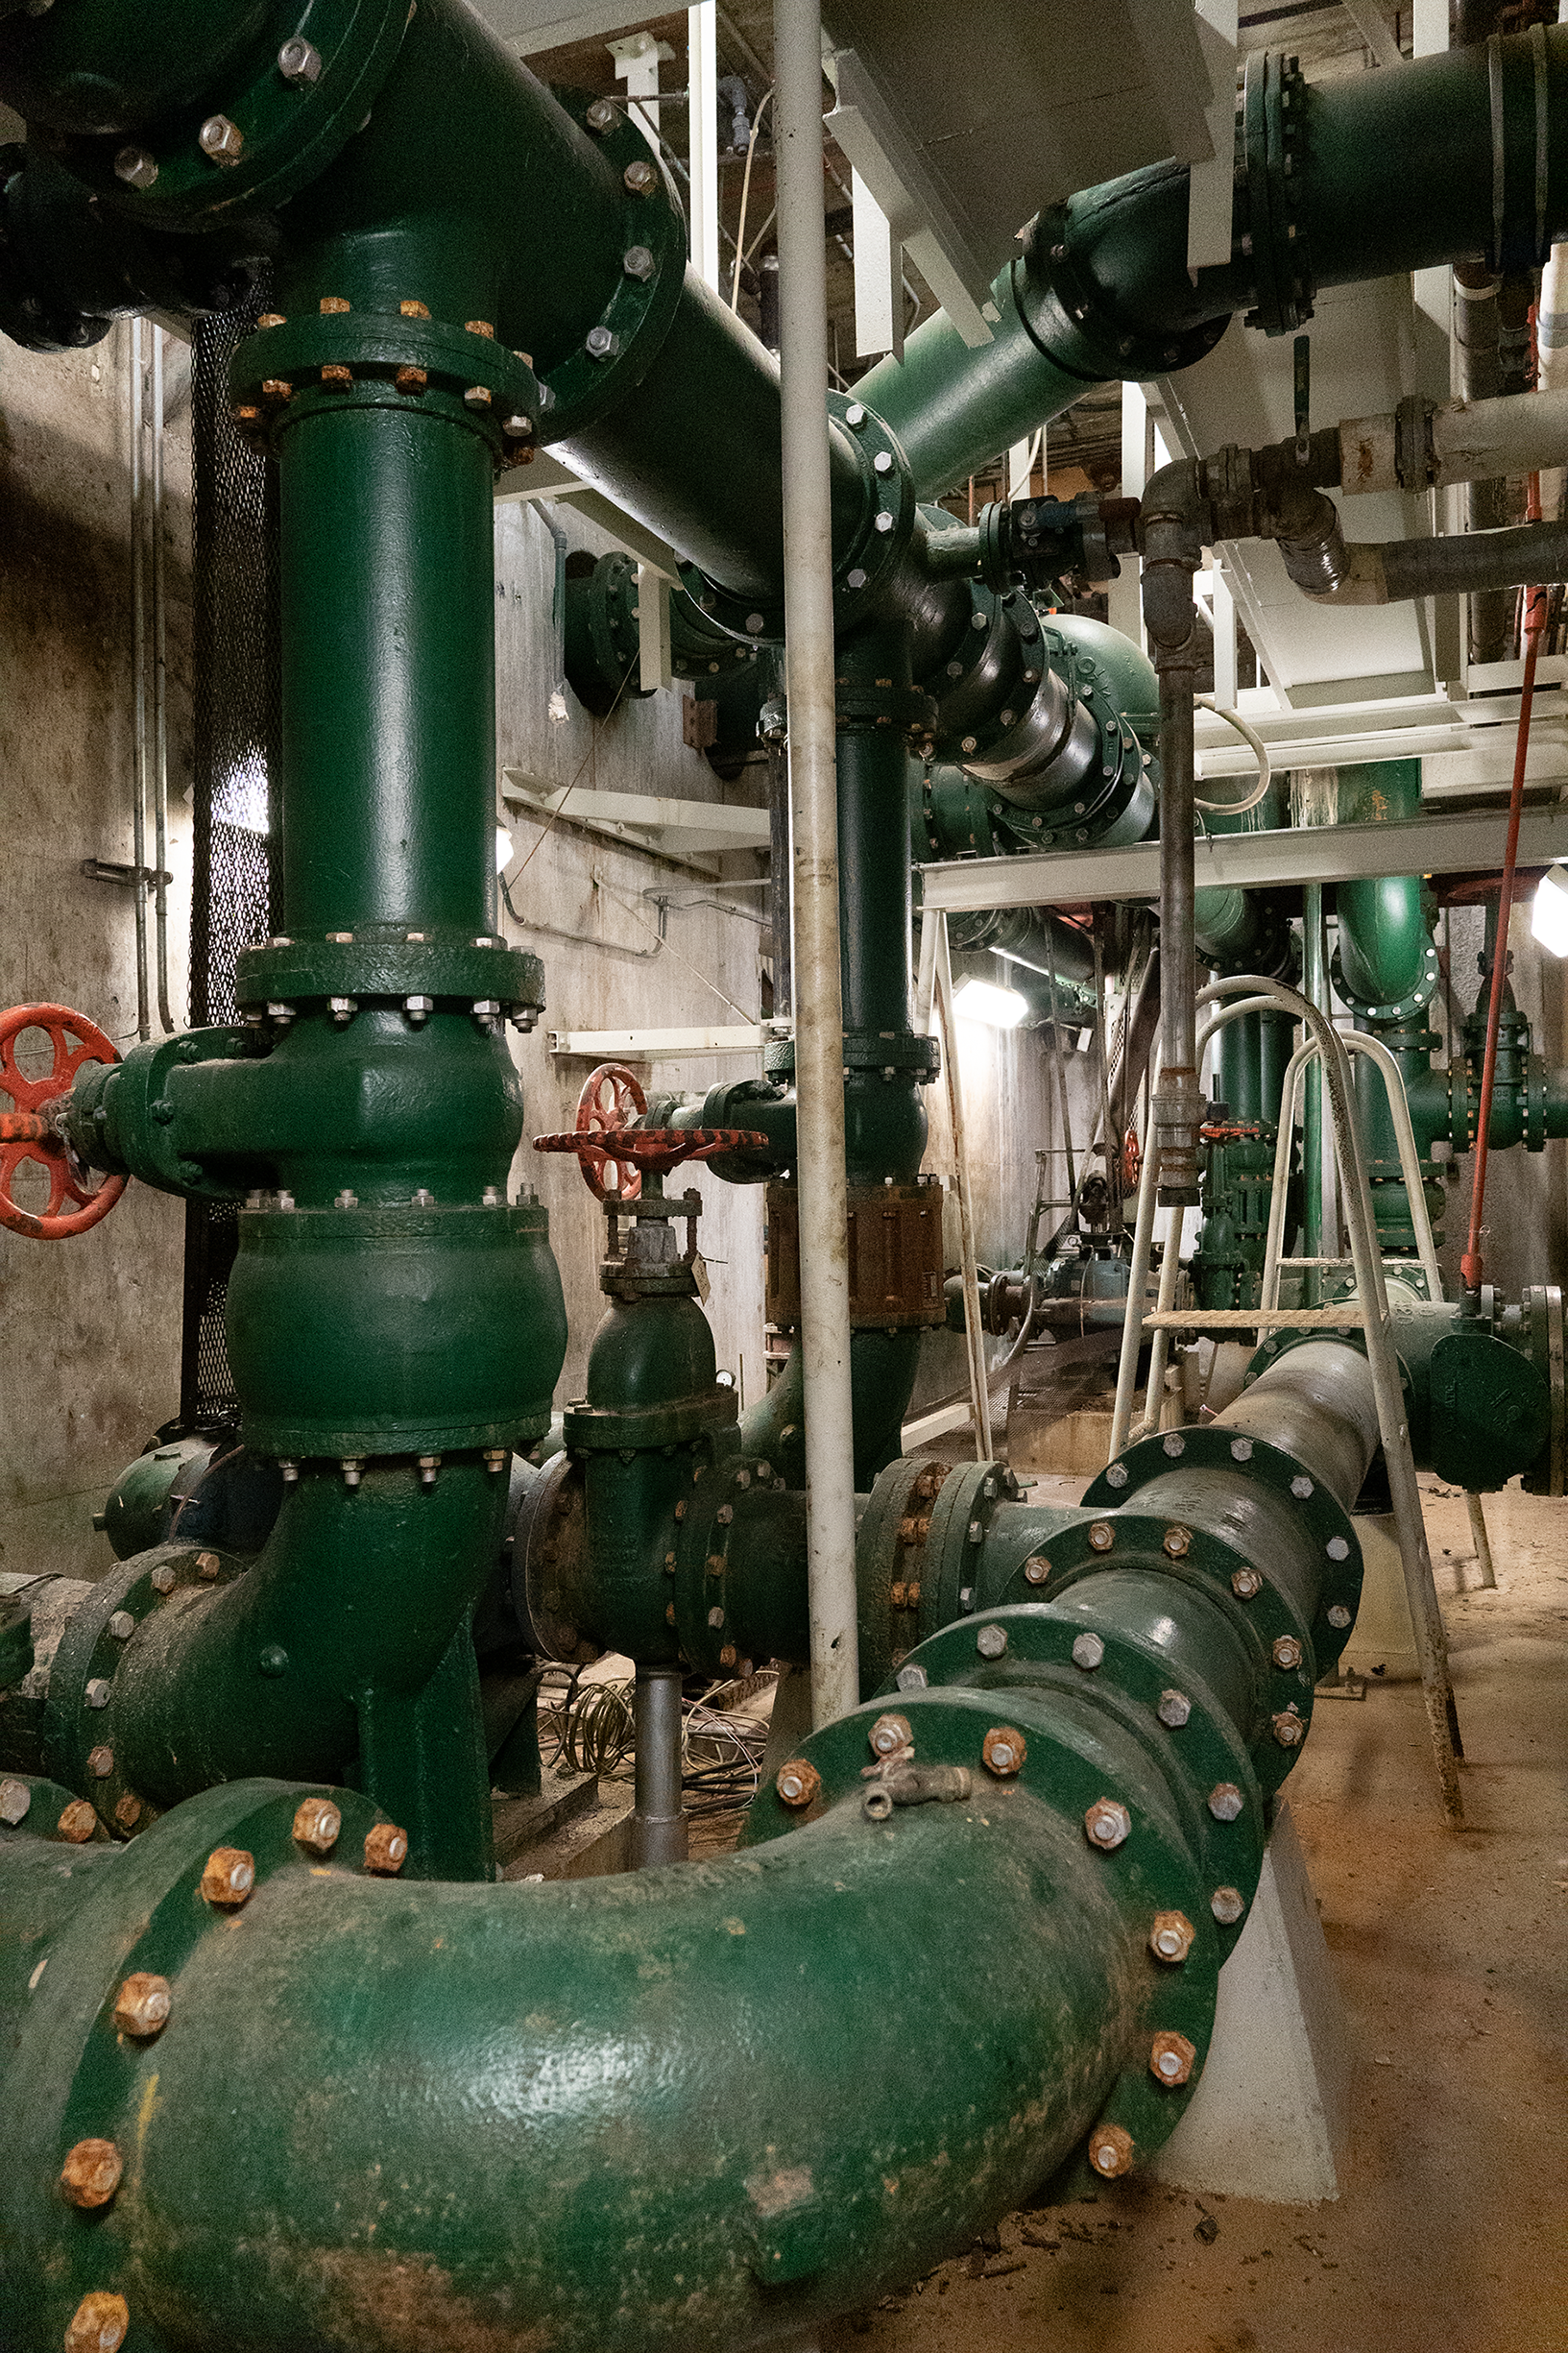 Large pipes inside the decommissioned water reservoir are shown.